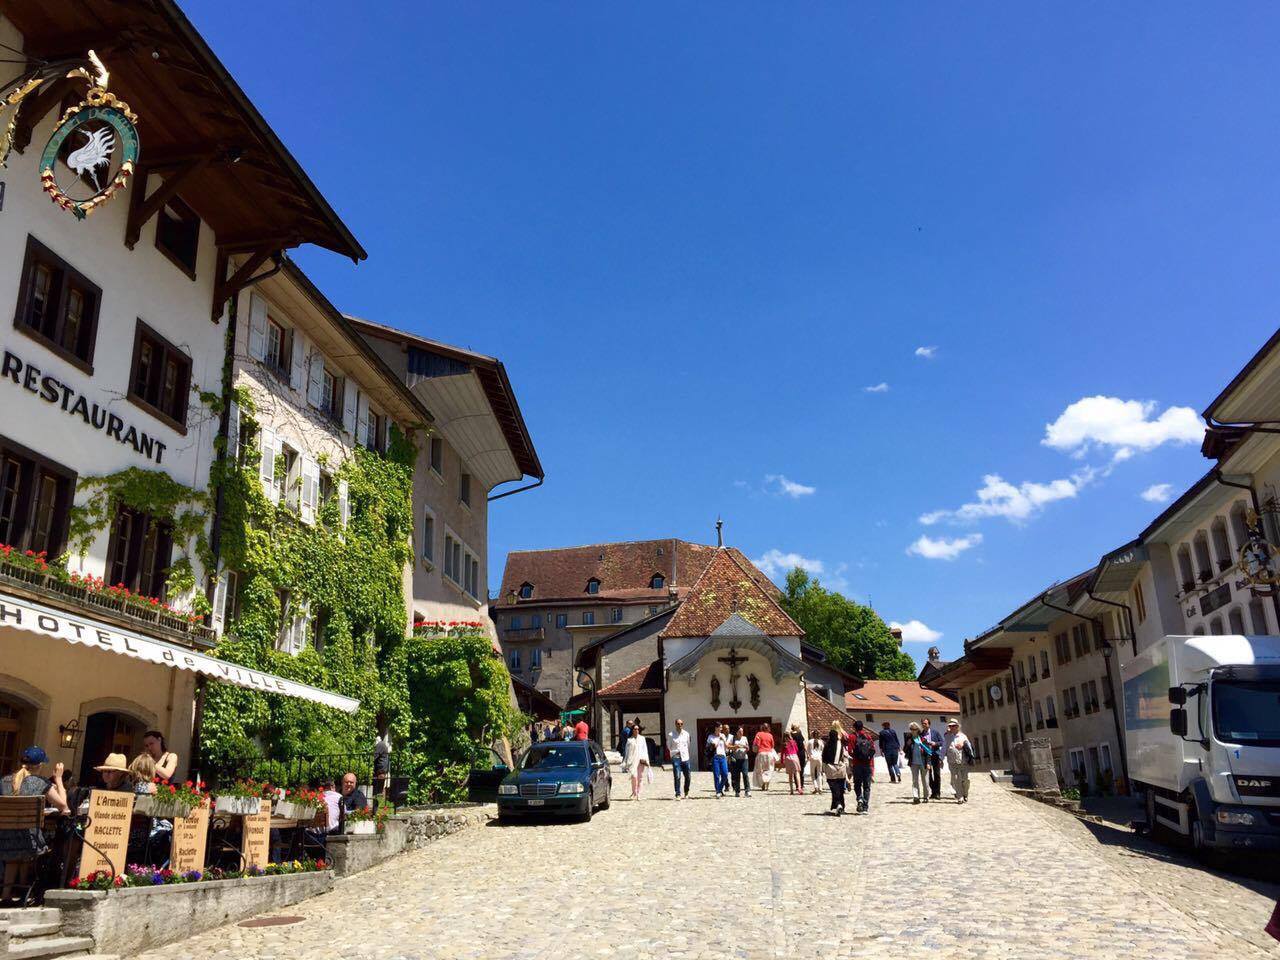 The town center is as quaint as its cobblestoned roads.